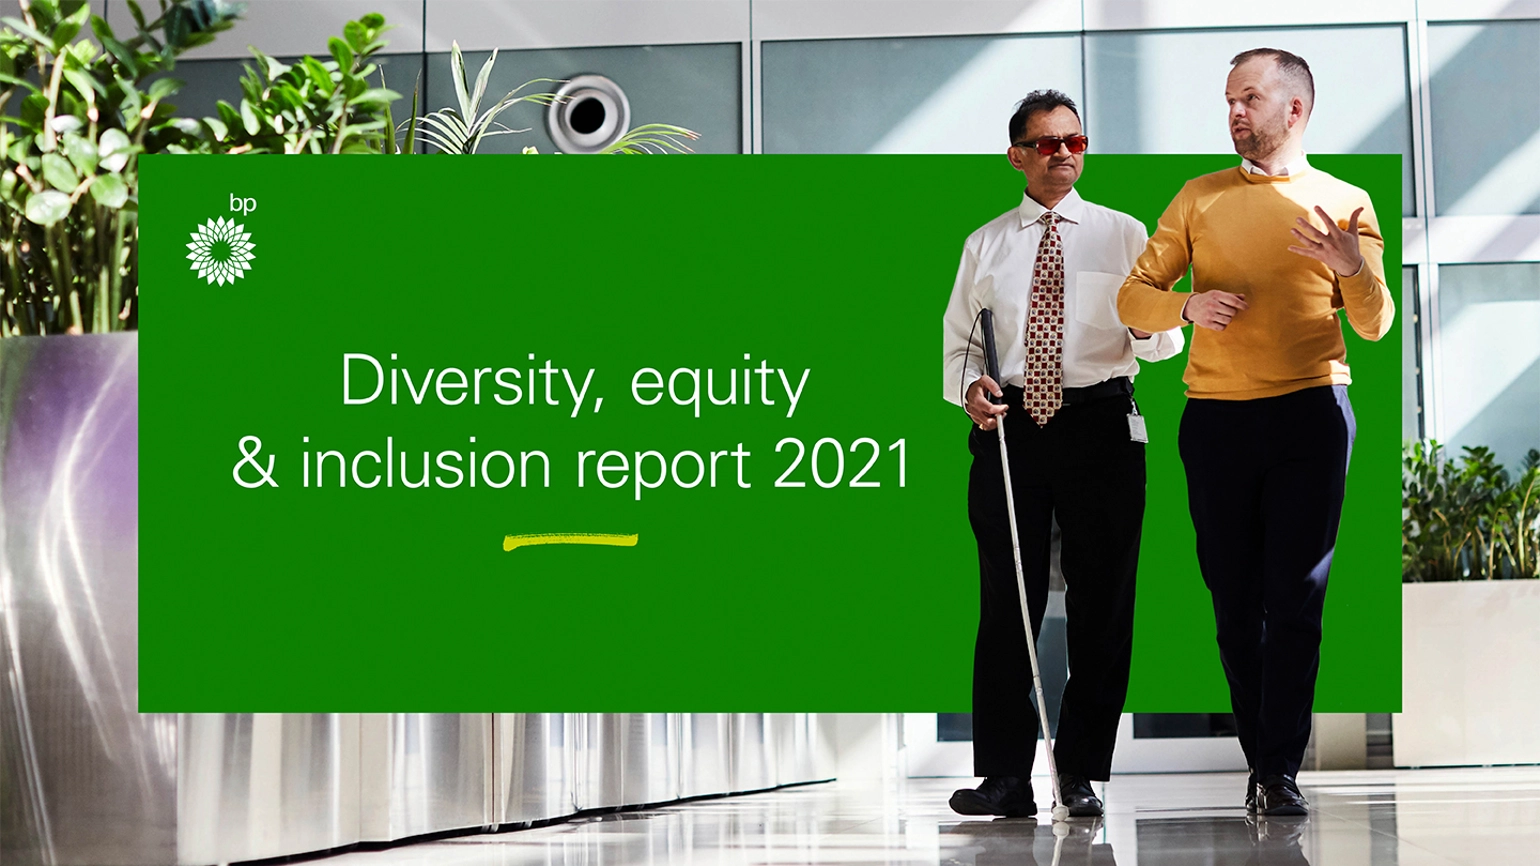 Image of a blind man with a cane walking with someone supporting him on top of a diversity, equity and inclusion report 2021 banner